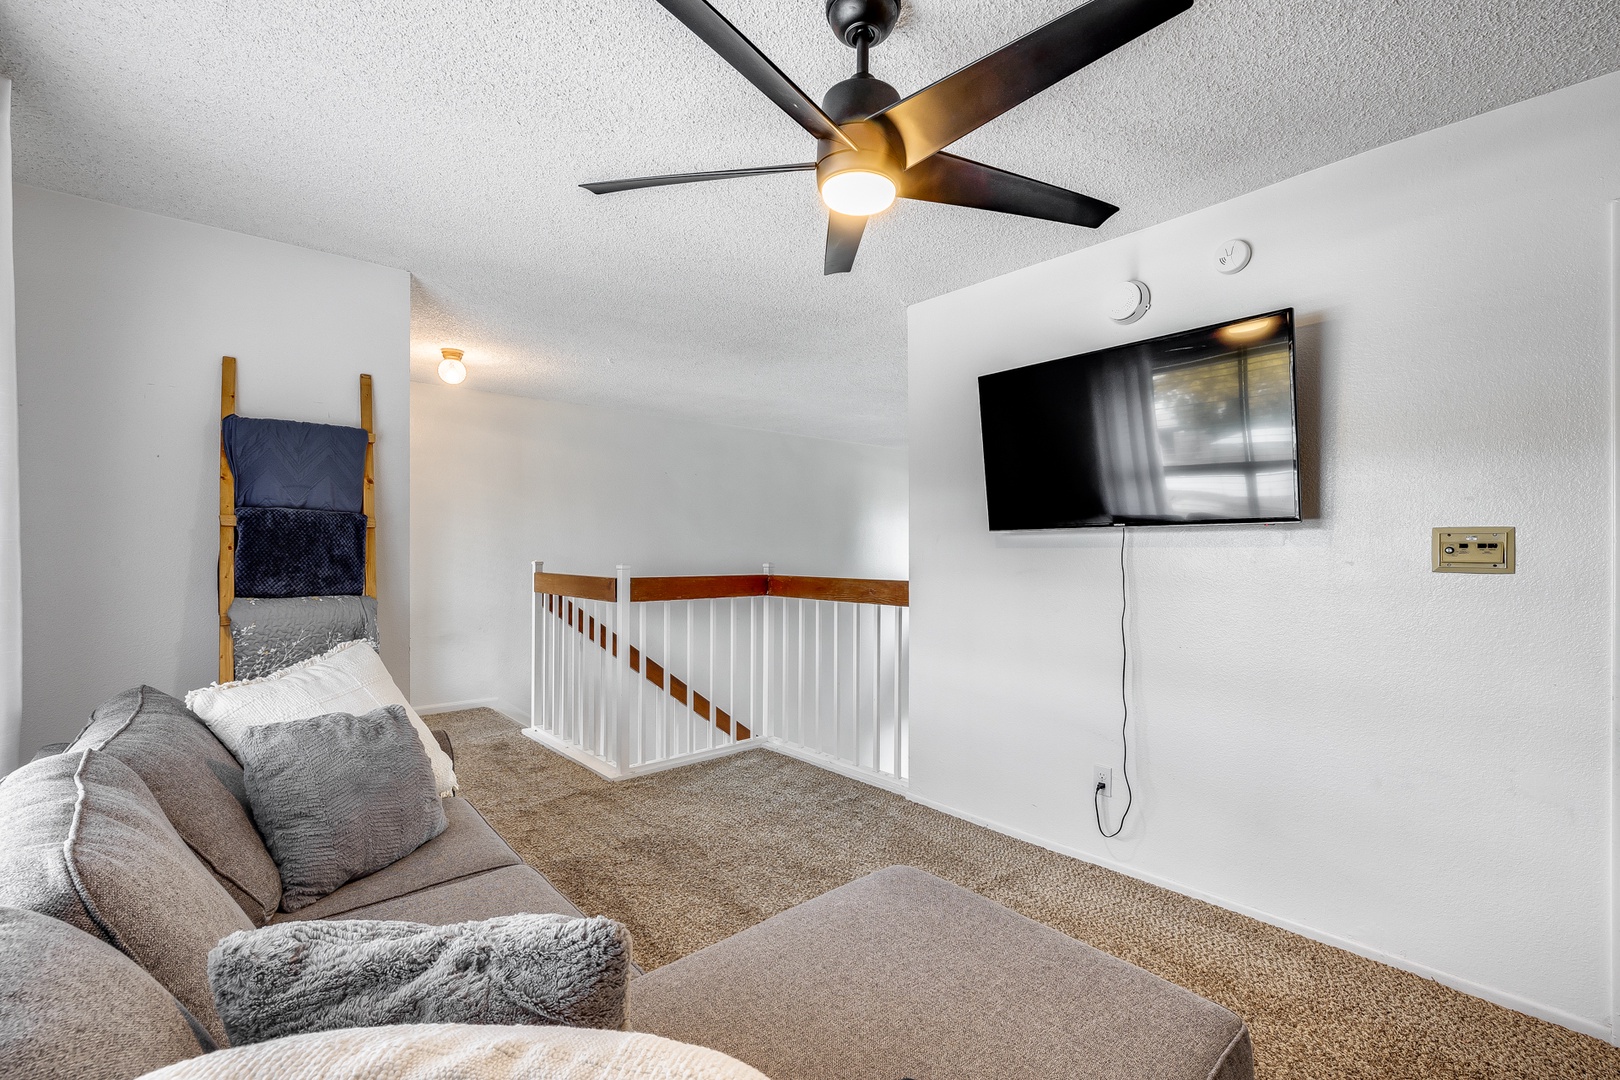 Glendale Vacation Rentals, Condo at the Bell Air - Head upstairs for some fun